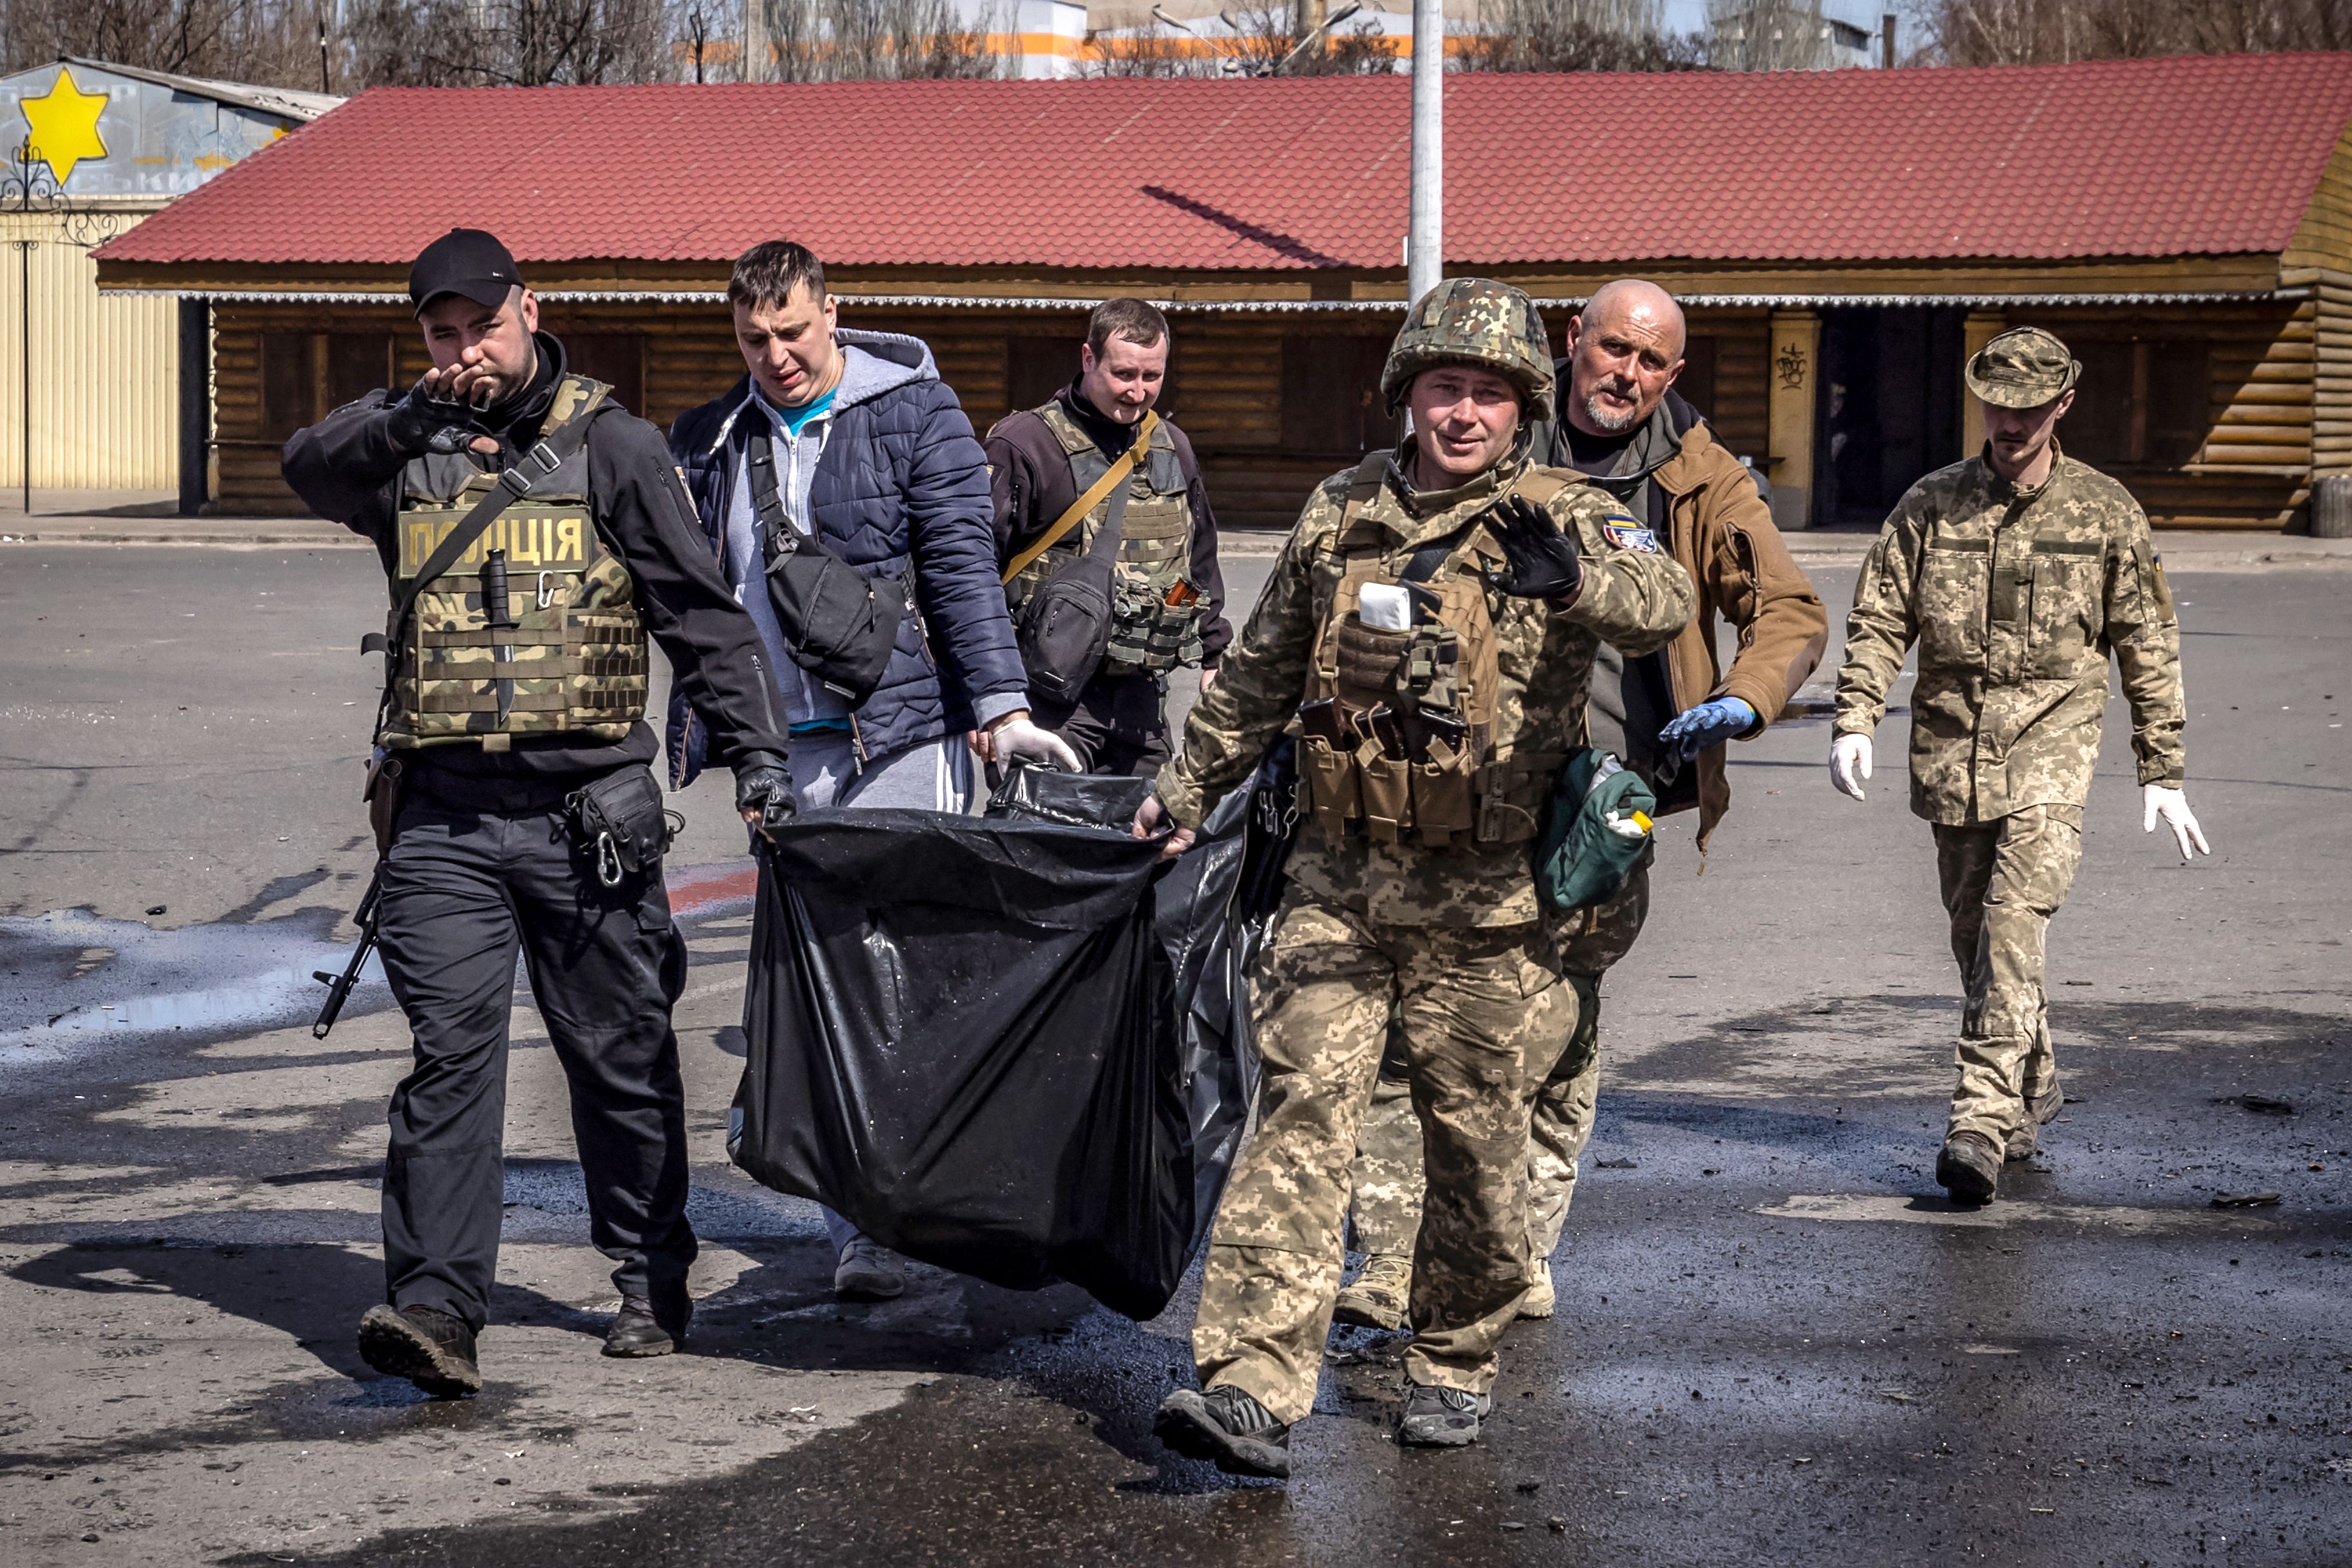 Ukrainian soldiers clear out bodies after a rocket attack at a train station in Kramatorsk, eastern Ukraine, on April 8.